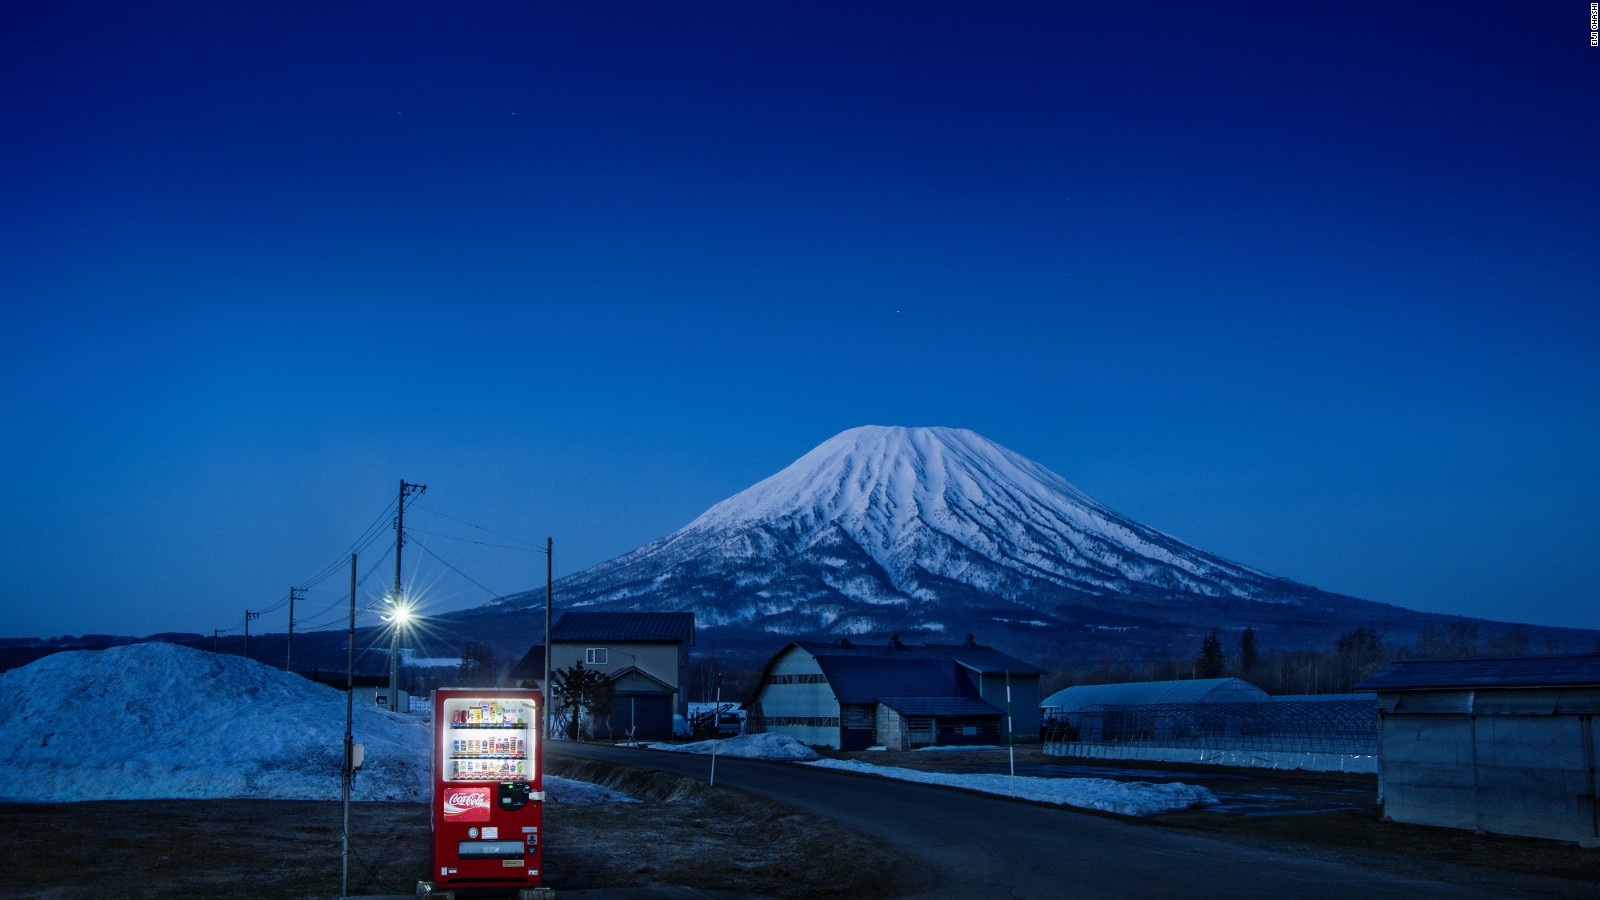 The beauty of Japan's lonely vending machines